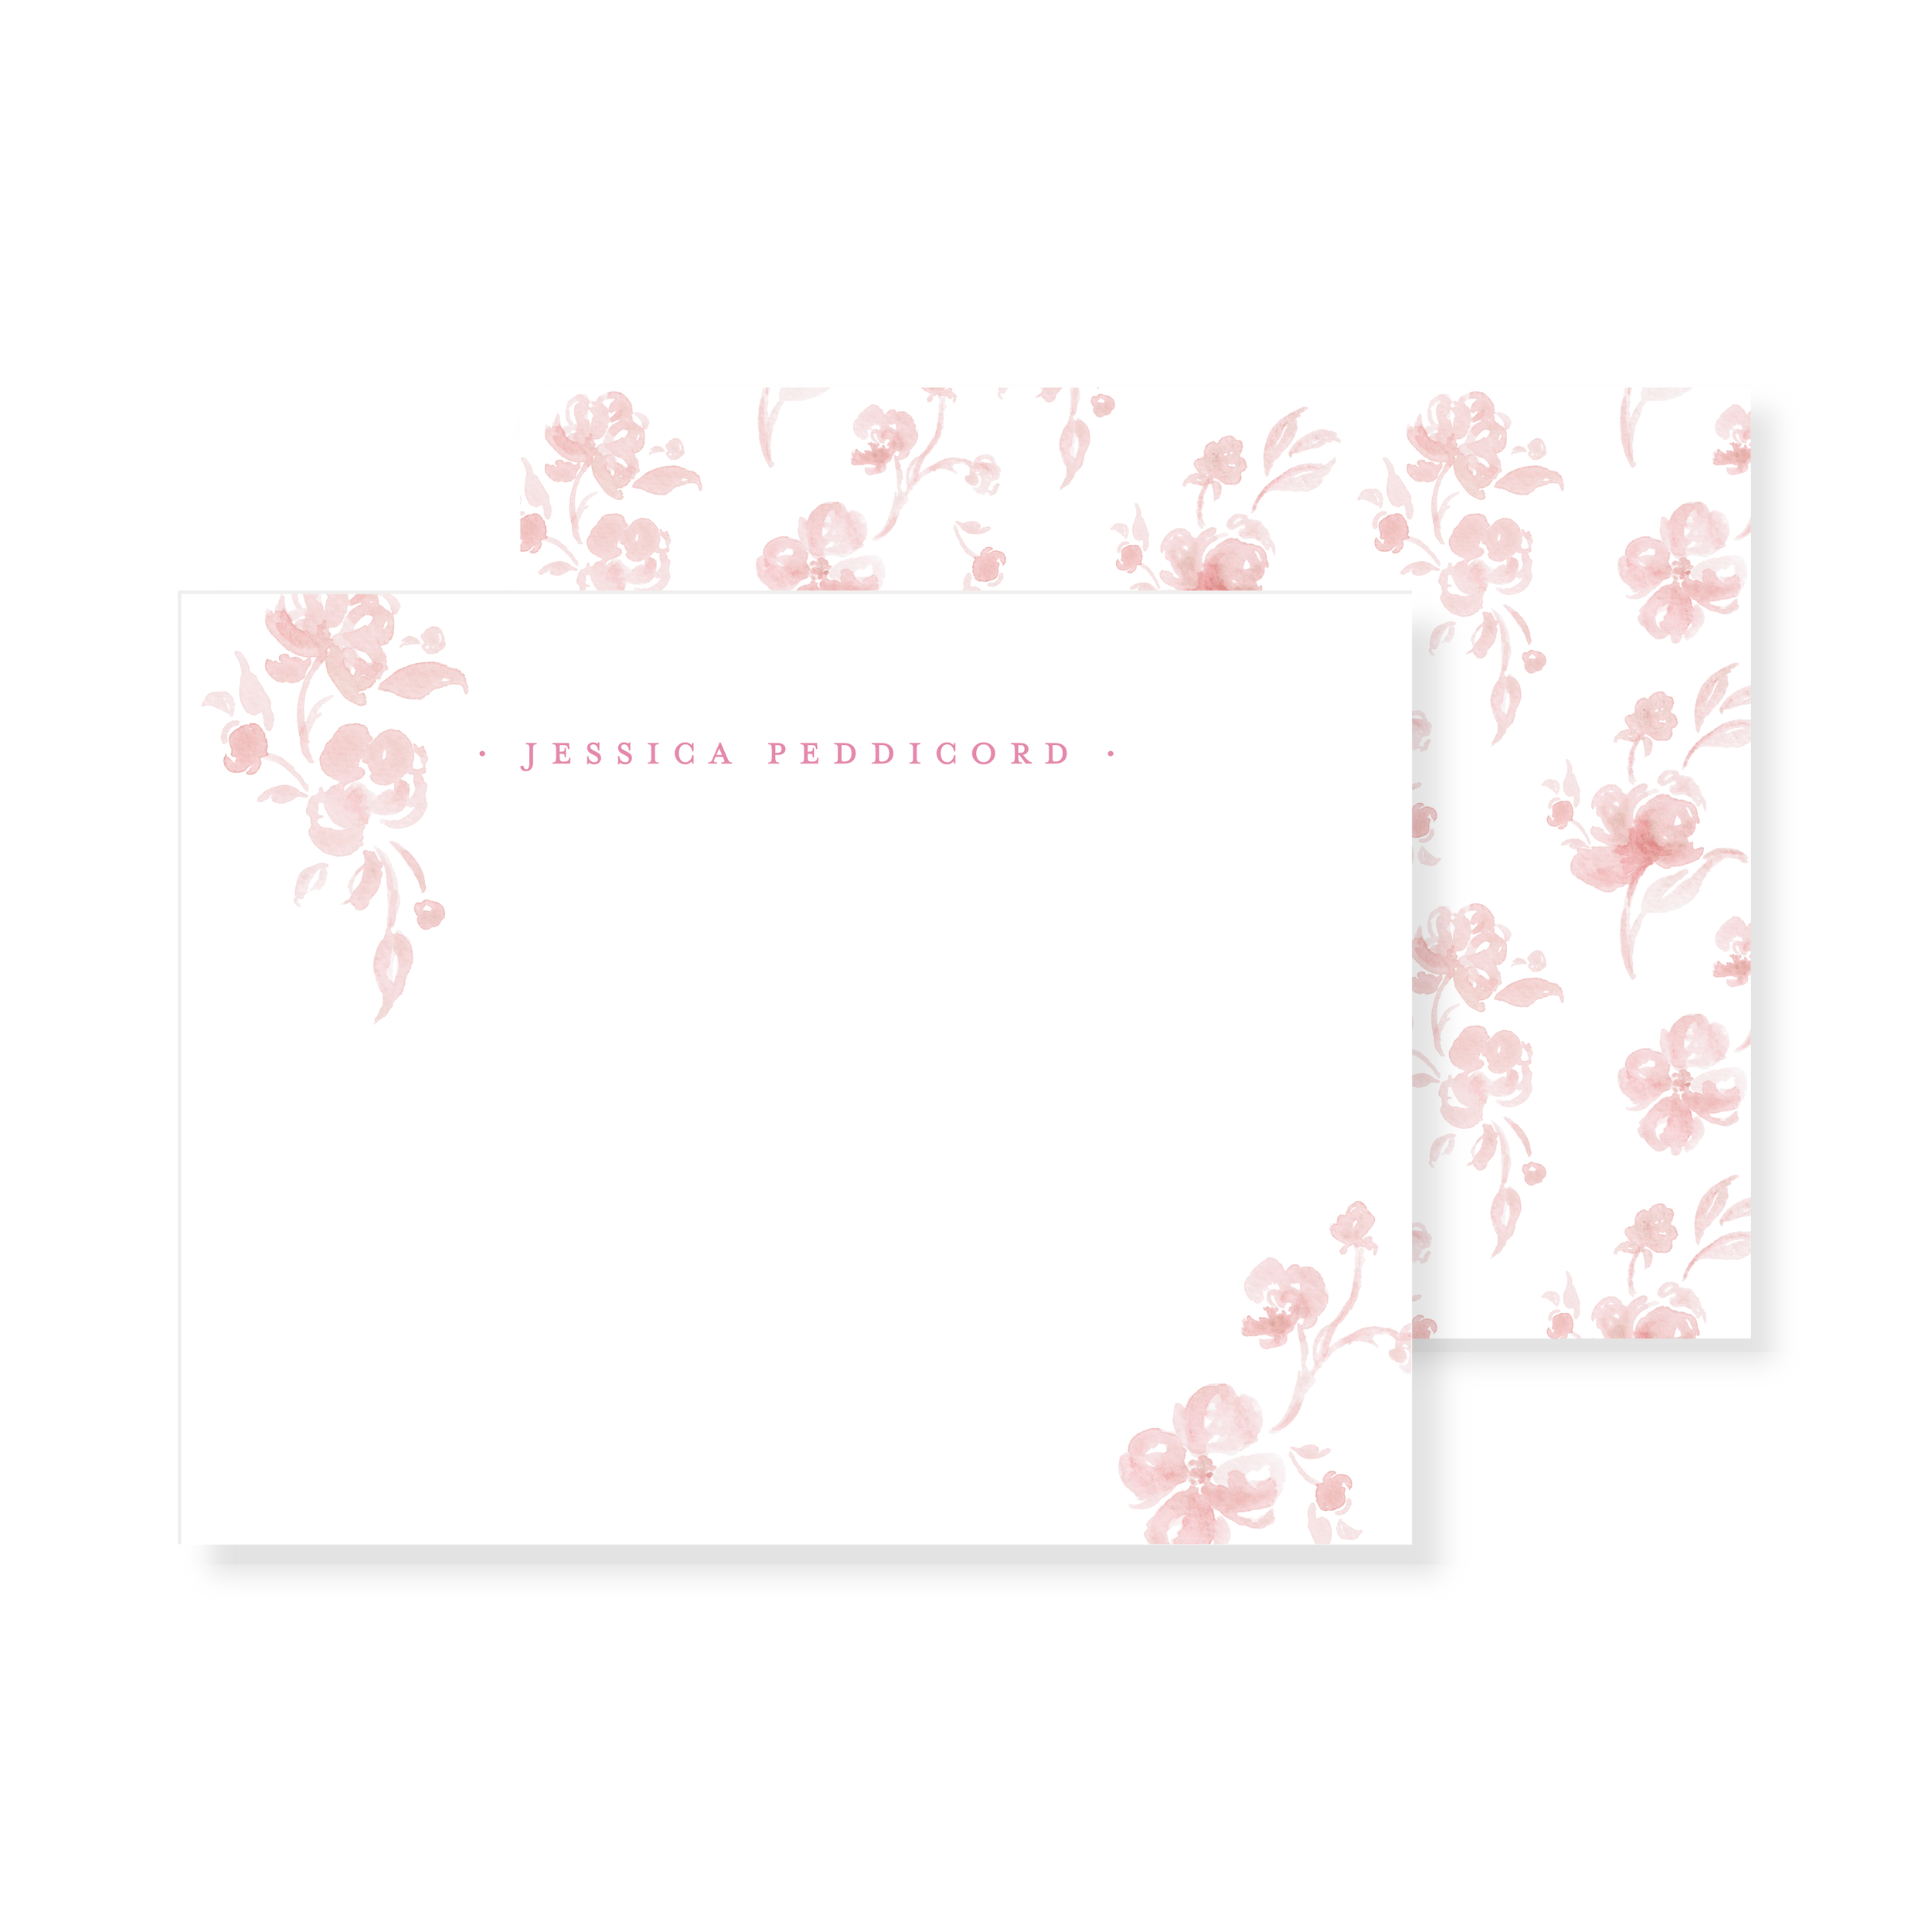 Printable Pink Floral Watercolor Stationery Set